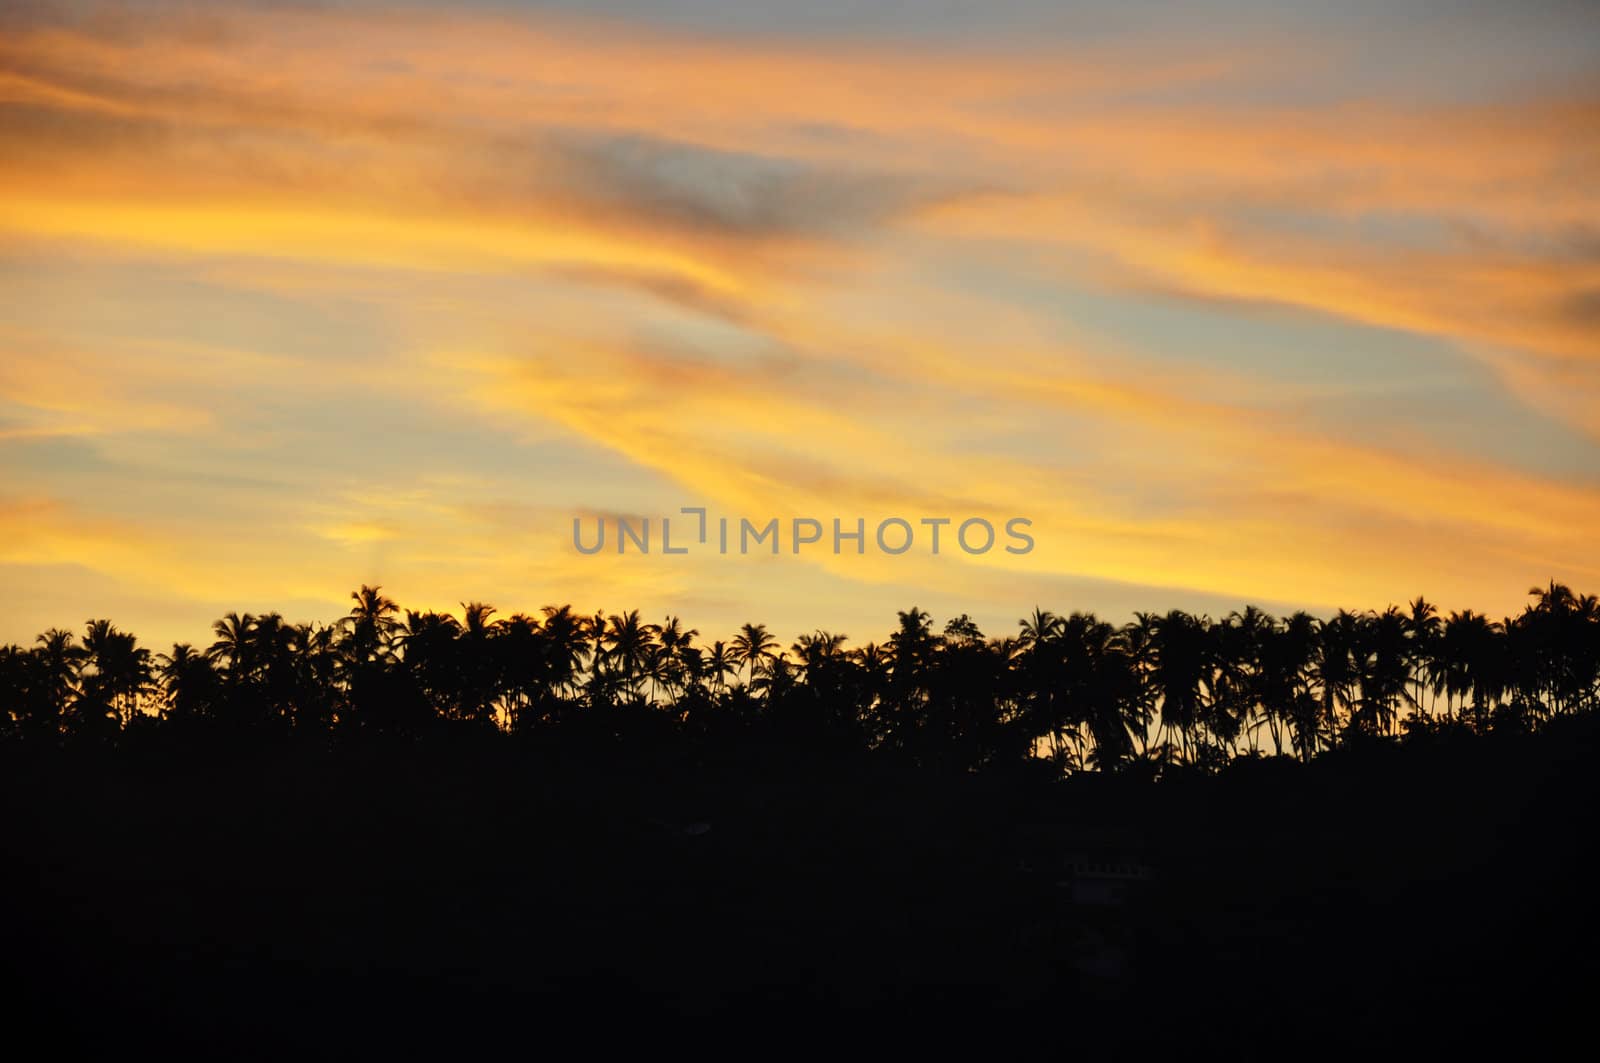 Silhouettes of Palm Trees at a Beautiful Sunset by kdreams02